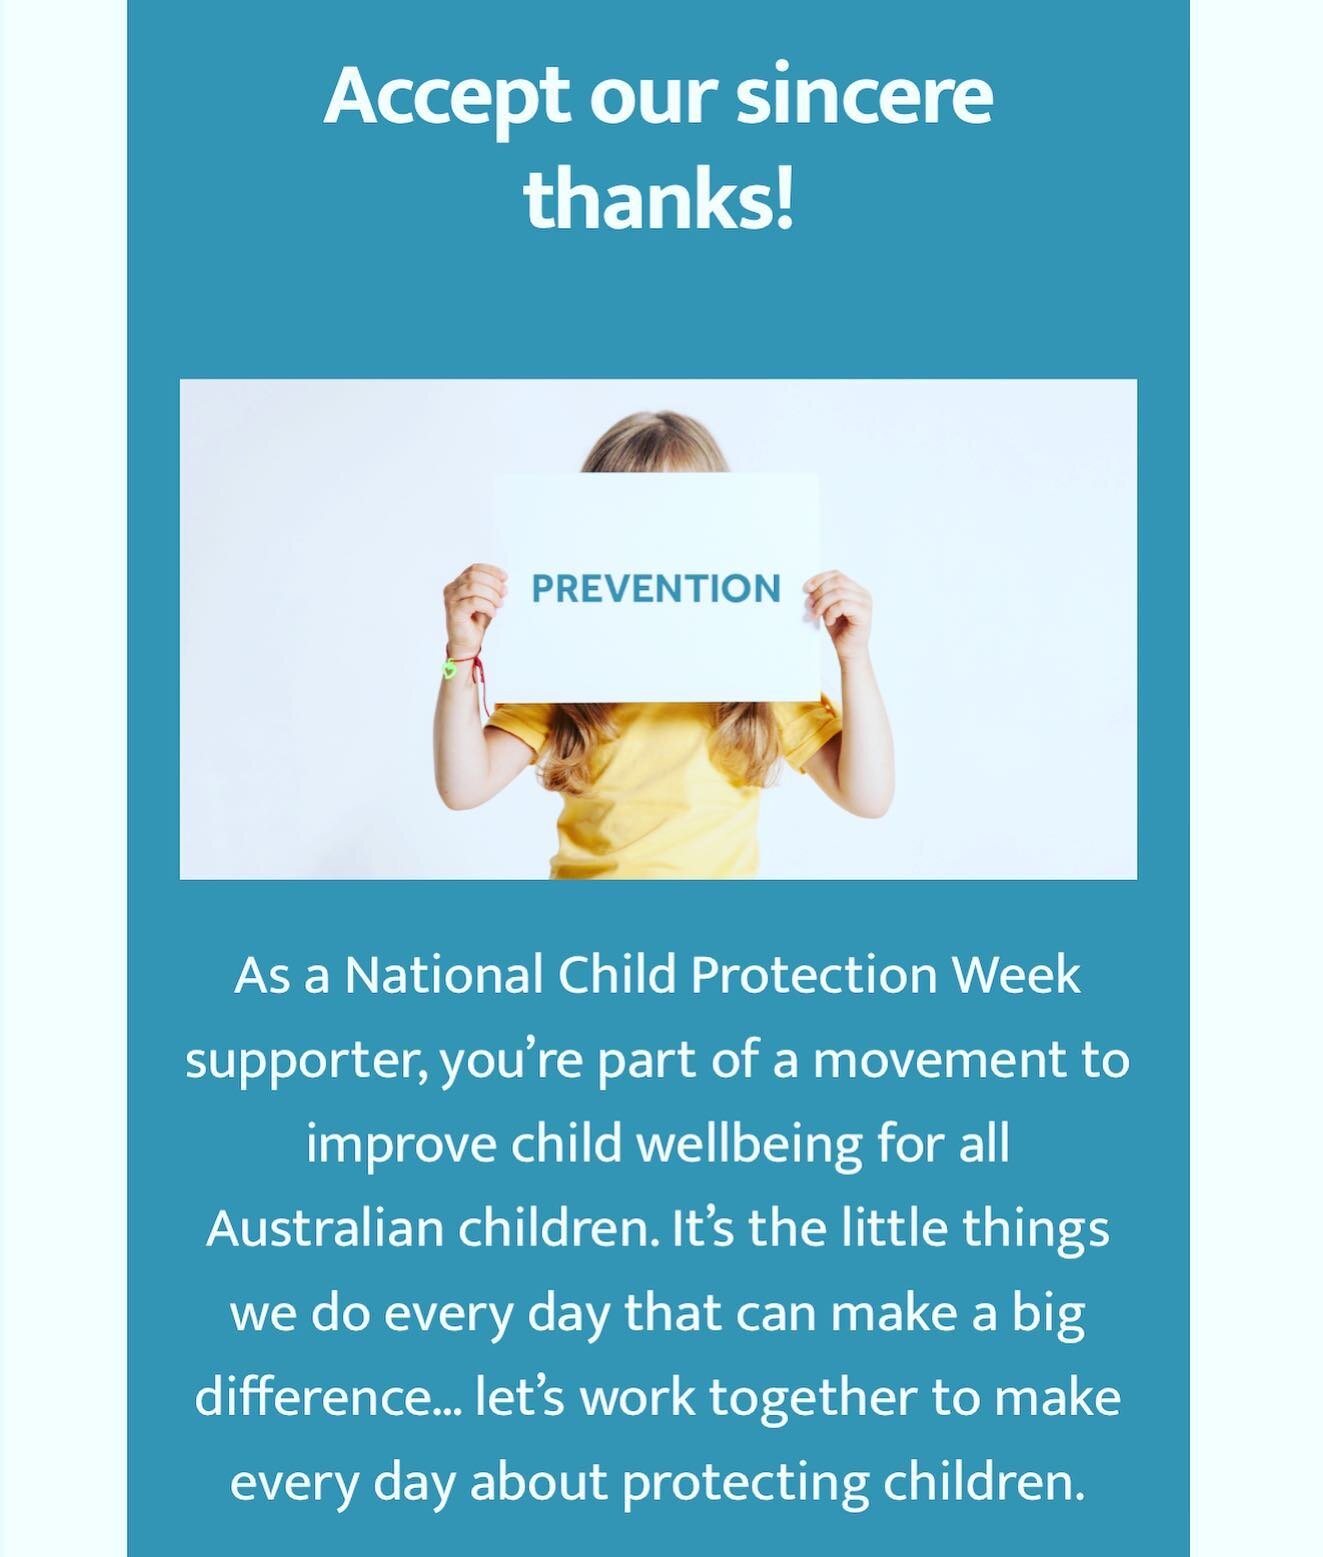 This coming week 1st-7th September 2019 is National National Child Protection Week. Be mindful of all the ways you can make a difference! #ncpw #ncpw19 #playyourpart